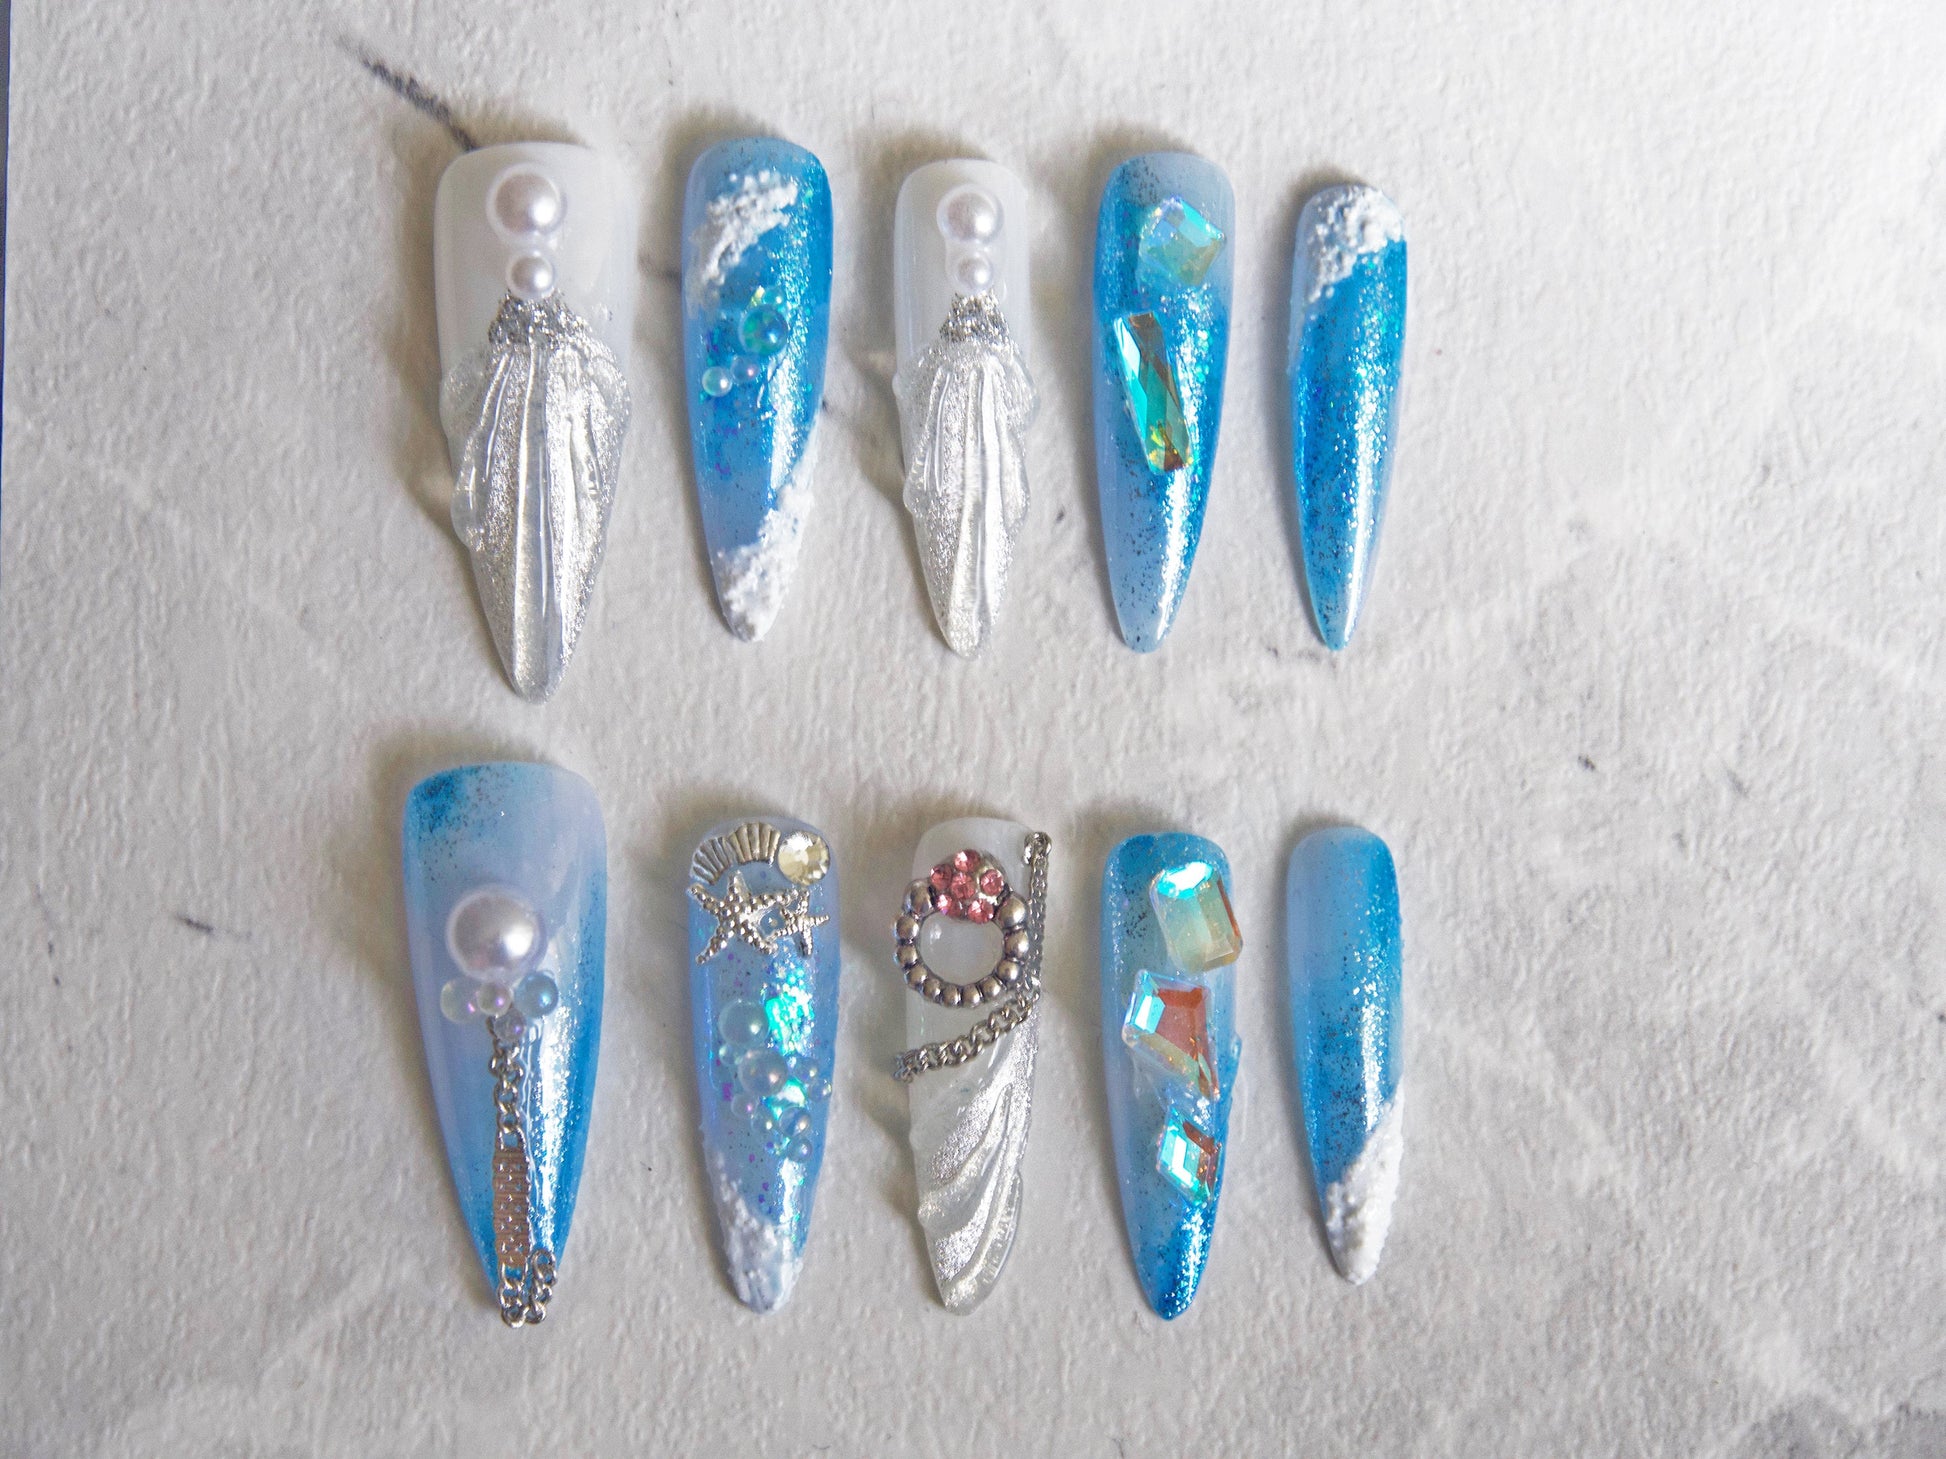 6g Gypsum Gel/ 3D Sand Effect Soak Off Nail Art Gel/ Lacquer Embossed Drawing Artistic Abstract Manicures Nail Design supplier